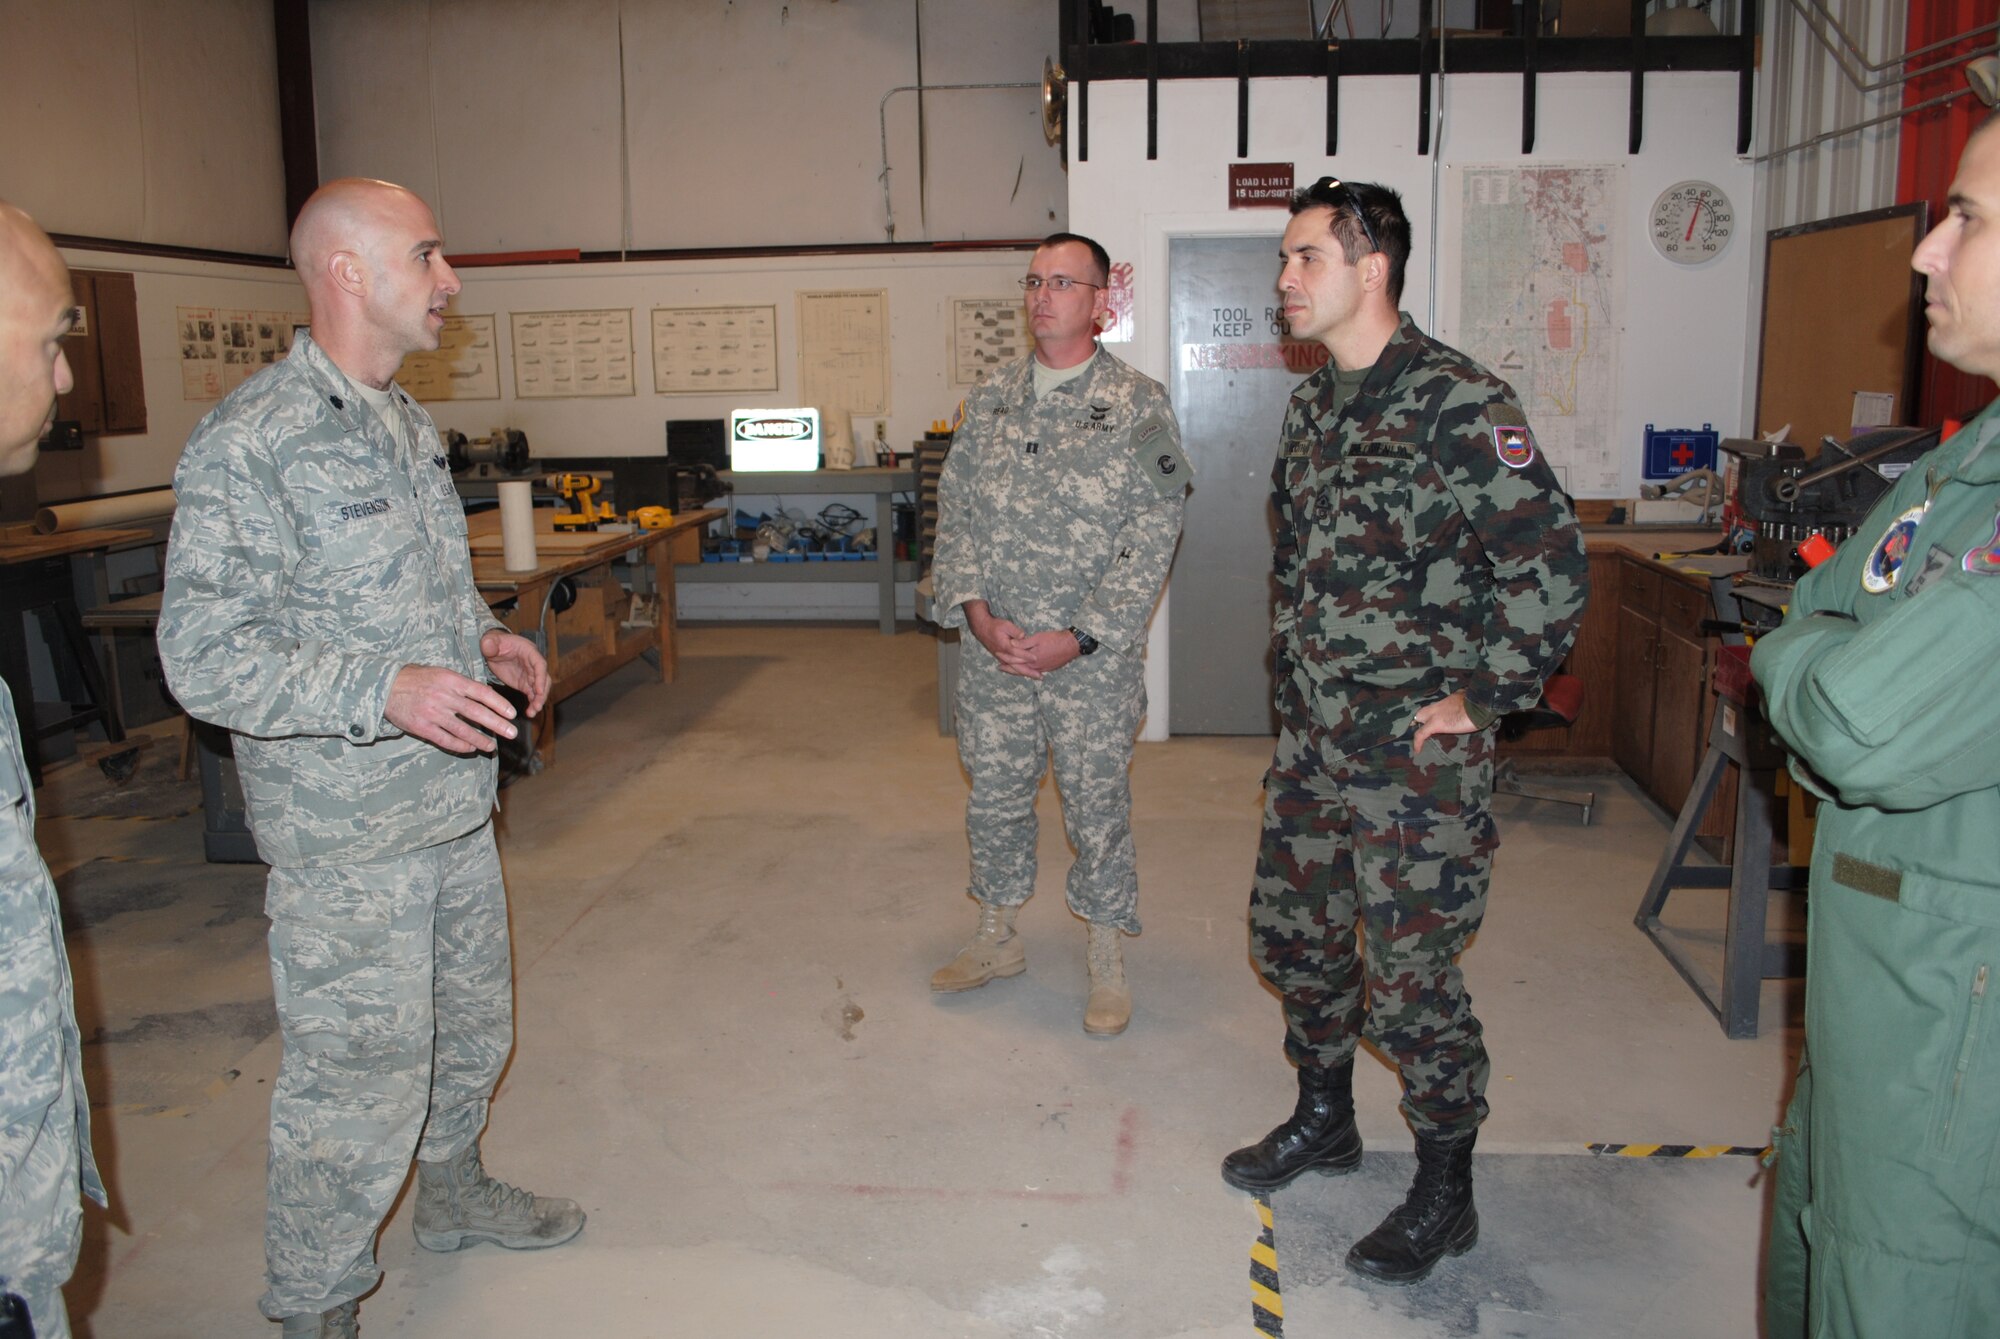 Lt. Col. John Stevenson, 140th Operation Support Squadron Airburst Range commander (left center) Stevens, Capt. Perry Read (center) and Slovenian armed Forces Sgt. 1st Class Darko Roth (right center) discuss training range management and how the Colorado Airmen manufacture their own training assets, such as targets, during a State Partnership Program visit to the 140th Operations Squadron's Airburst Range at Fort Carson, Colo., Oct. 31, 2012. The CONG and the Republic of Slovenia have been partner nations since 1993, when the program began. In addition to many other milestones in the program, Citizen-Soldiers from the CONG and soldiers from Slovenia have deployed together many times as members of the Operational Mentor Liaison Teams, now called Military Assistance Teams, to help train soldiers of the Afghan National Army. (Official Army National Guard photo by Officer Candidate Jennings Catlett)